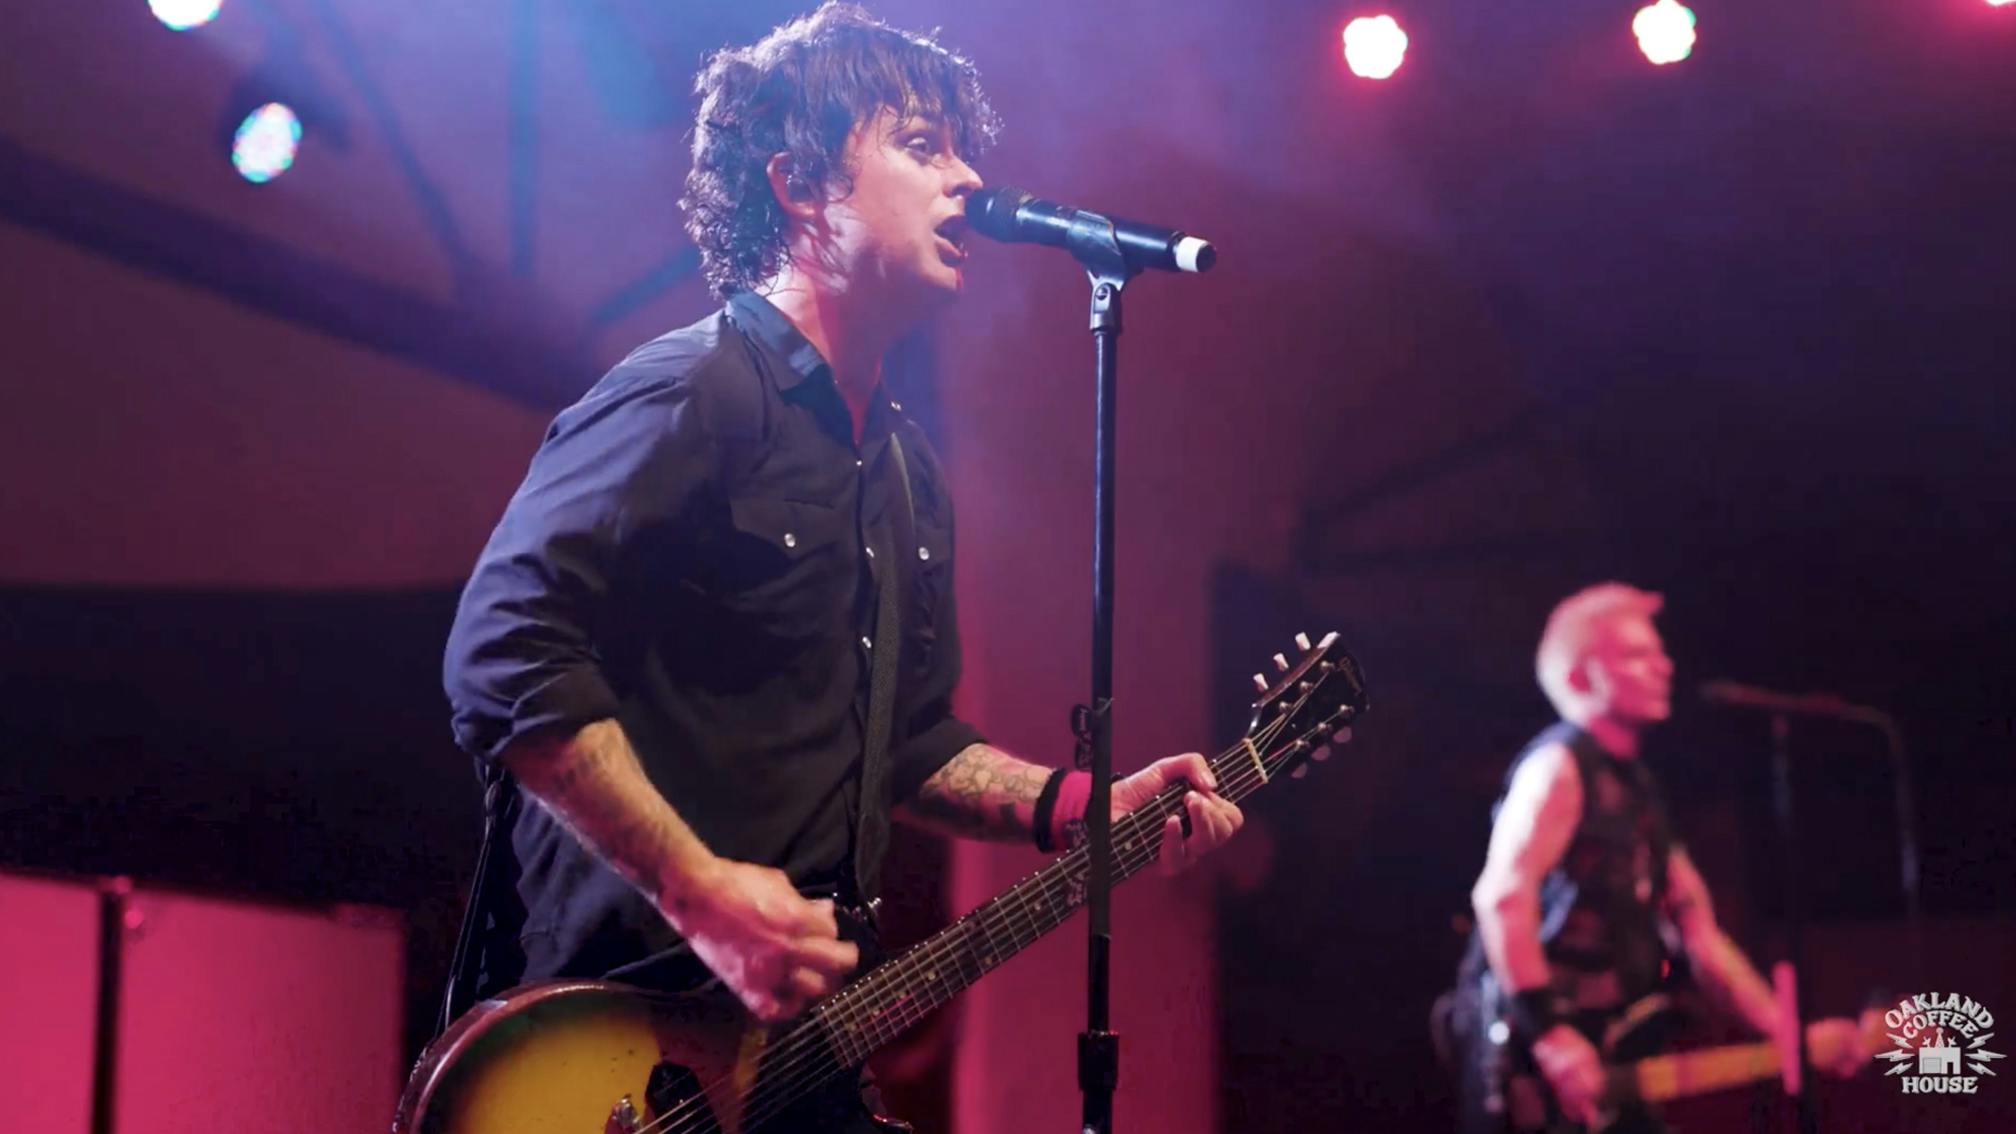 Go behind-the-scenes at Green Day's Hella Mega Tour warm-up show last week